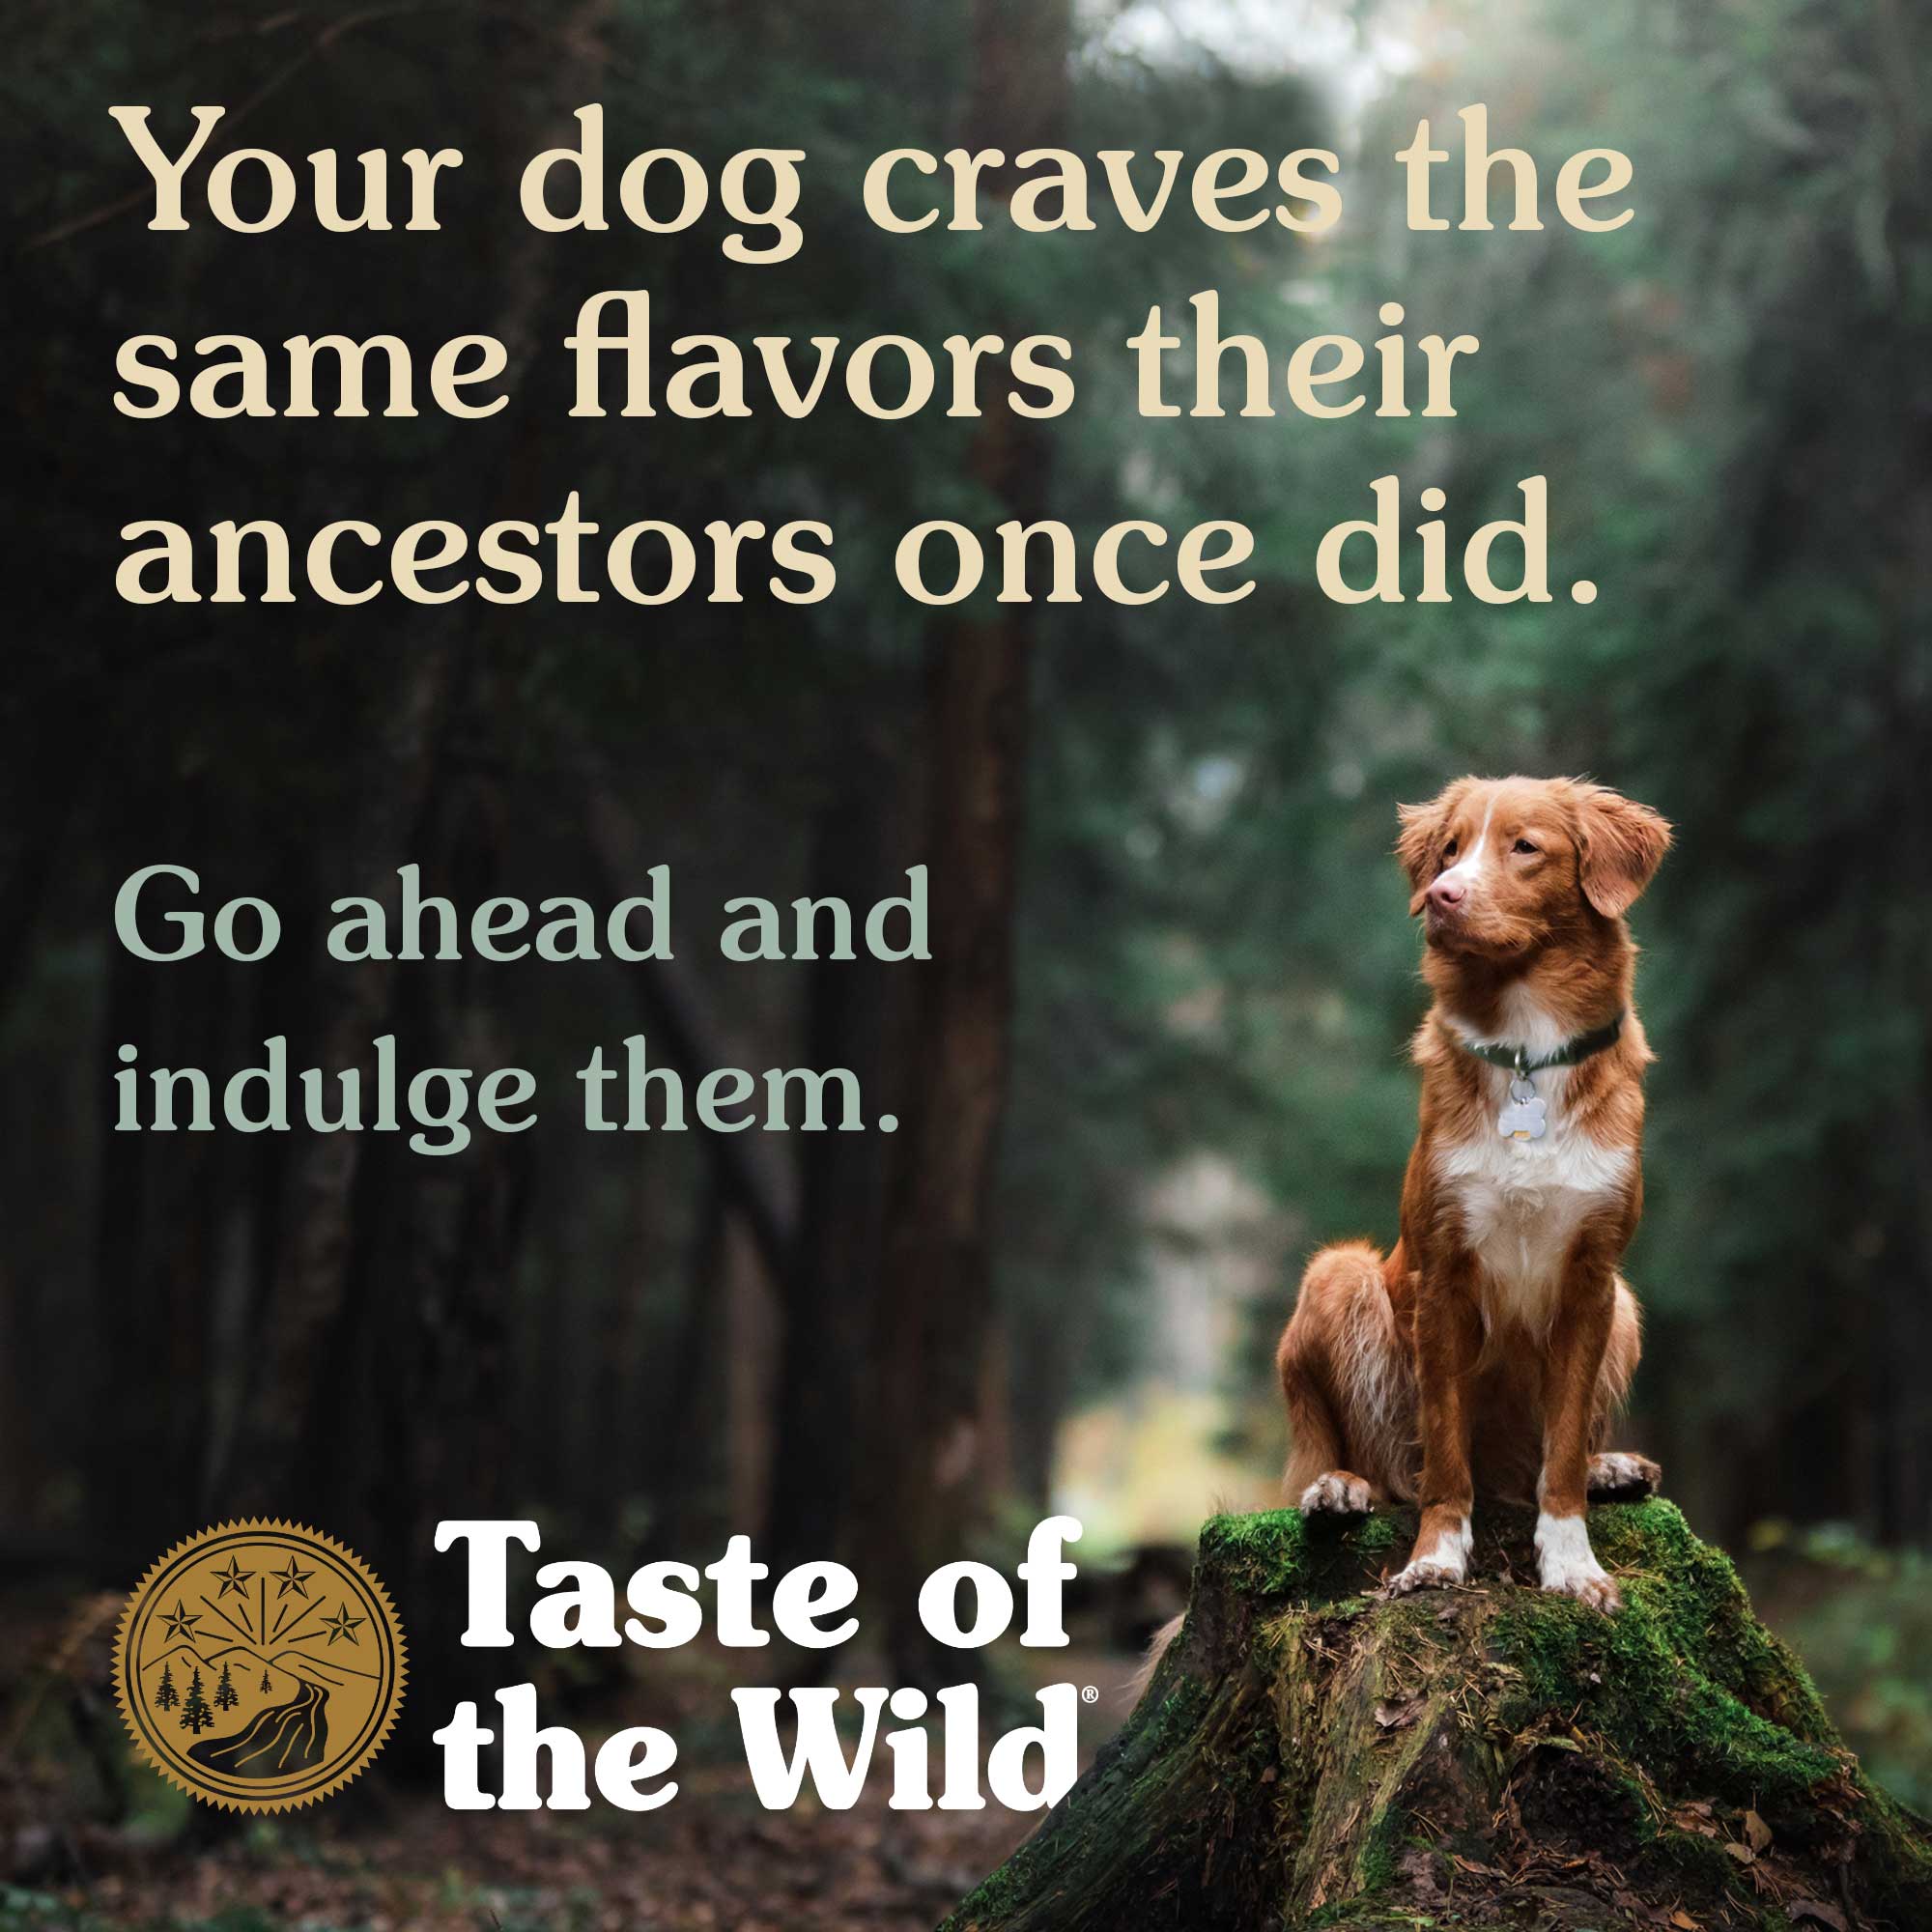 Taste Of The Wild Pacific Stream Puppy Formula Grain-Free Dog Food - Mutts & Co.